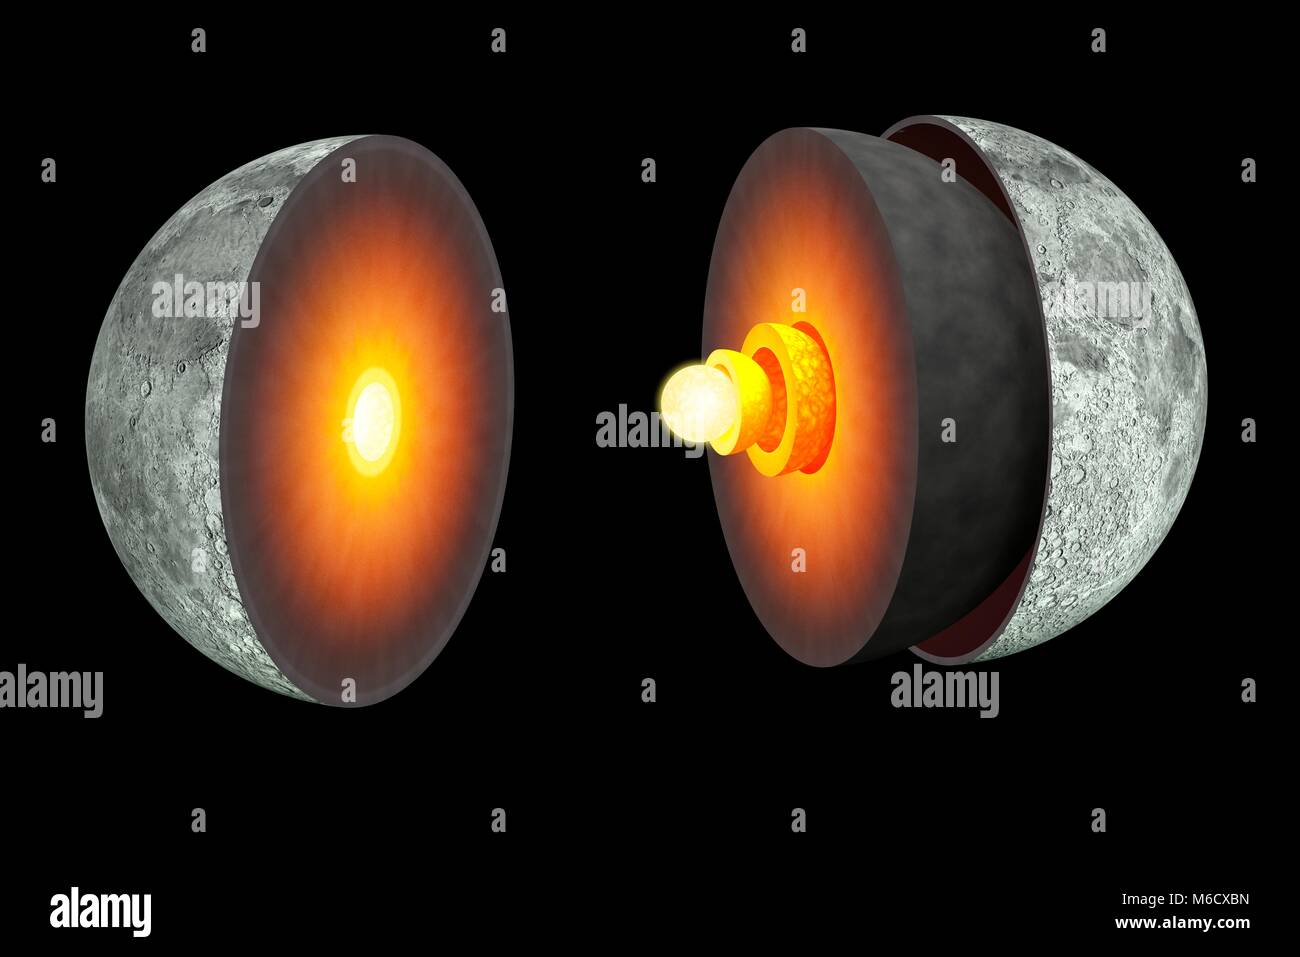 Diagram showing the interior of the Earth's Moon. The outermost layer, the crust, is about 45 miles (70 km) thick. This is thicker than the Earth's crust, which cooled down at a much slower rate. Beneath the crust is a thick silicate mantle, then a zone of partial melt with a radius of 480 km. This is probably where moonquakes occur. Current thinking, based on a re-examination of Apollo lunar seismometer data, is that the core, once thought solid, is now composed of a liquid outer component (330 km radius) and a solid inner one (240 km). Stock Photo